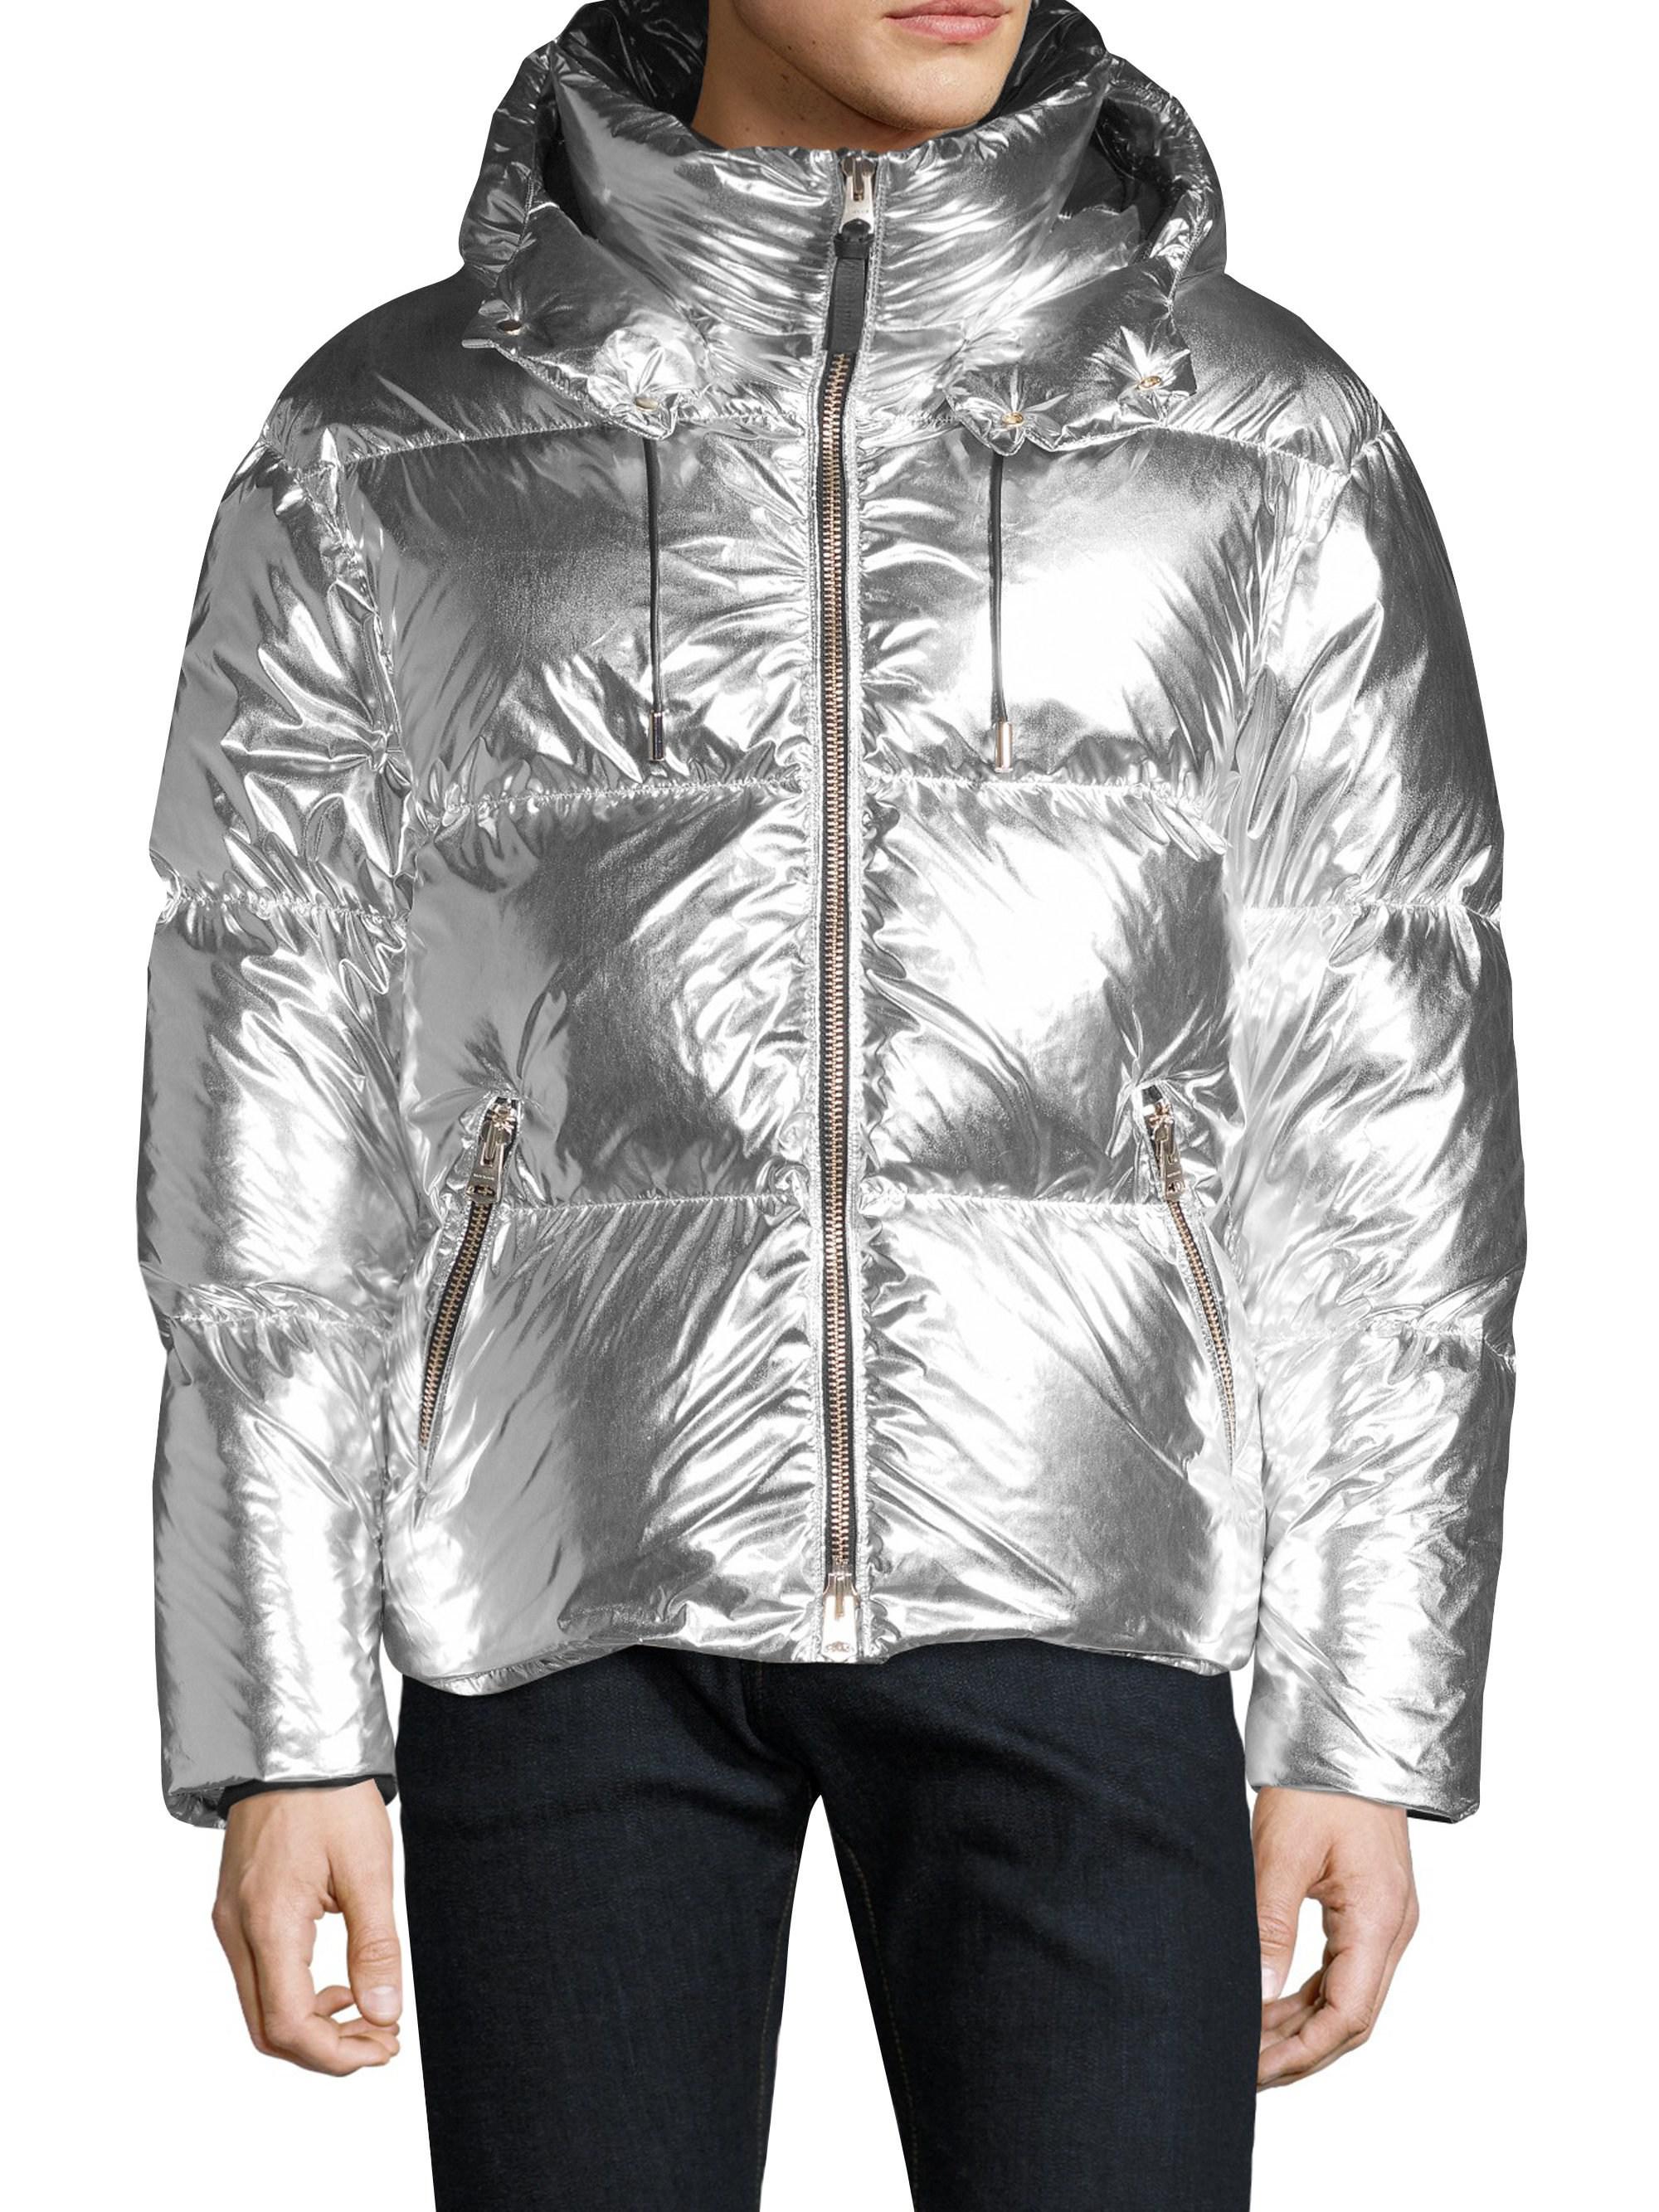 Mackage Goose Holiday Metallic Quilted Puffer Down Jacket for Men - Lyst